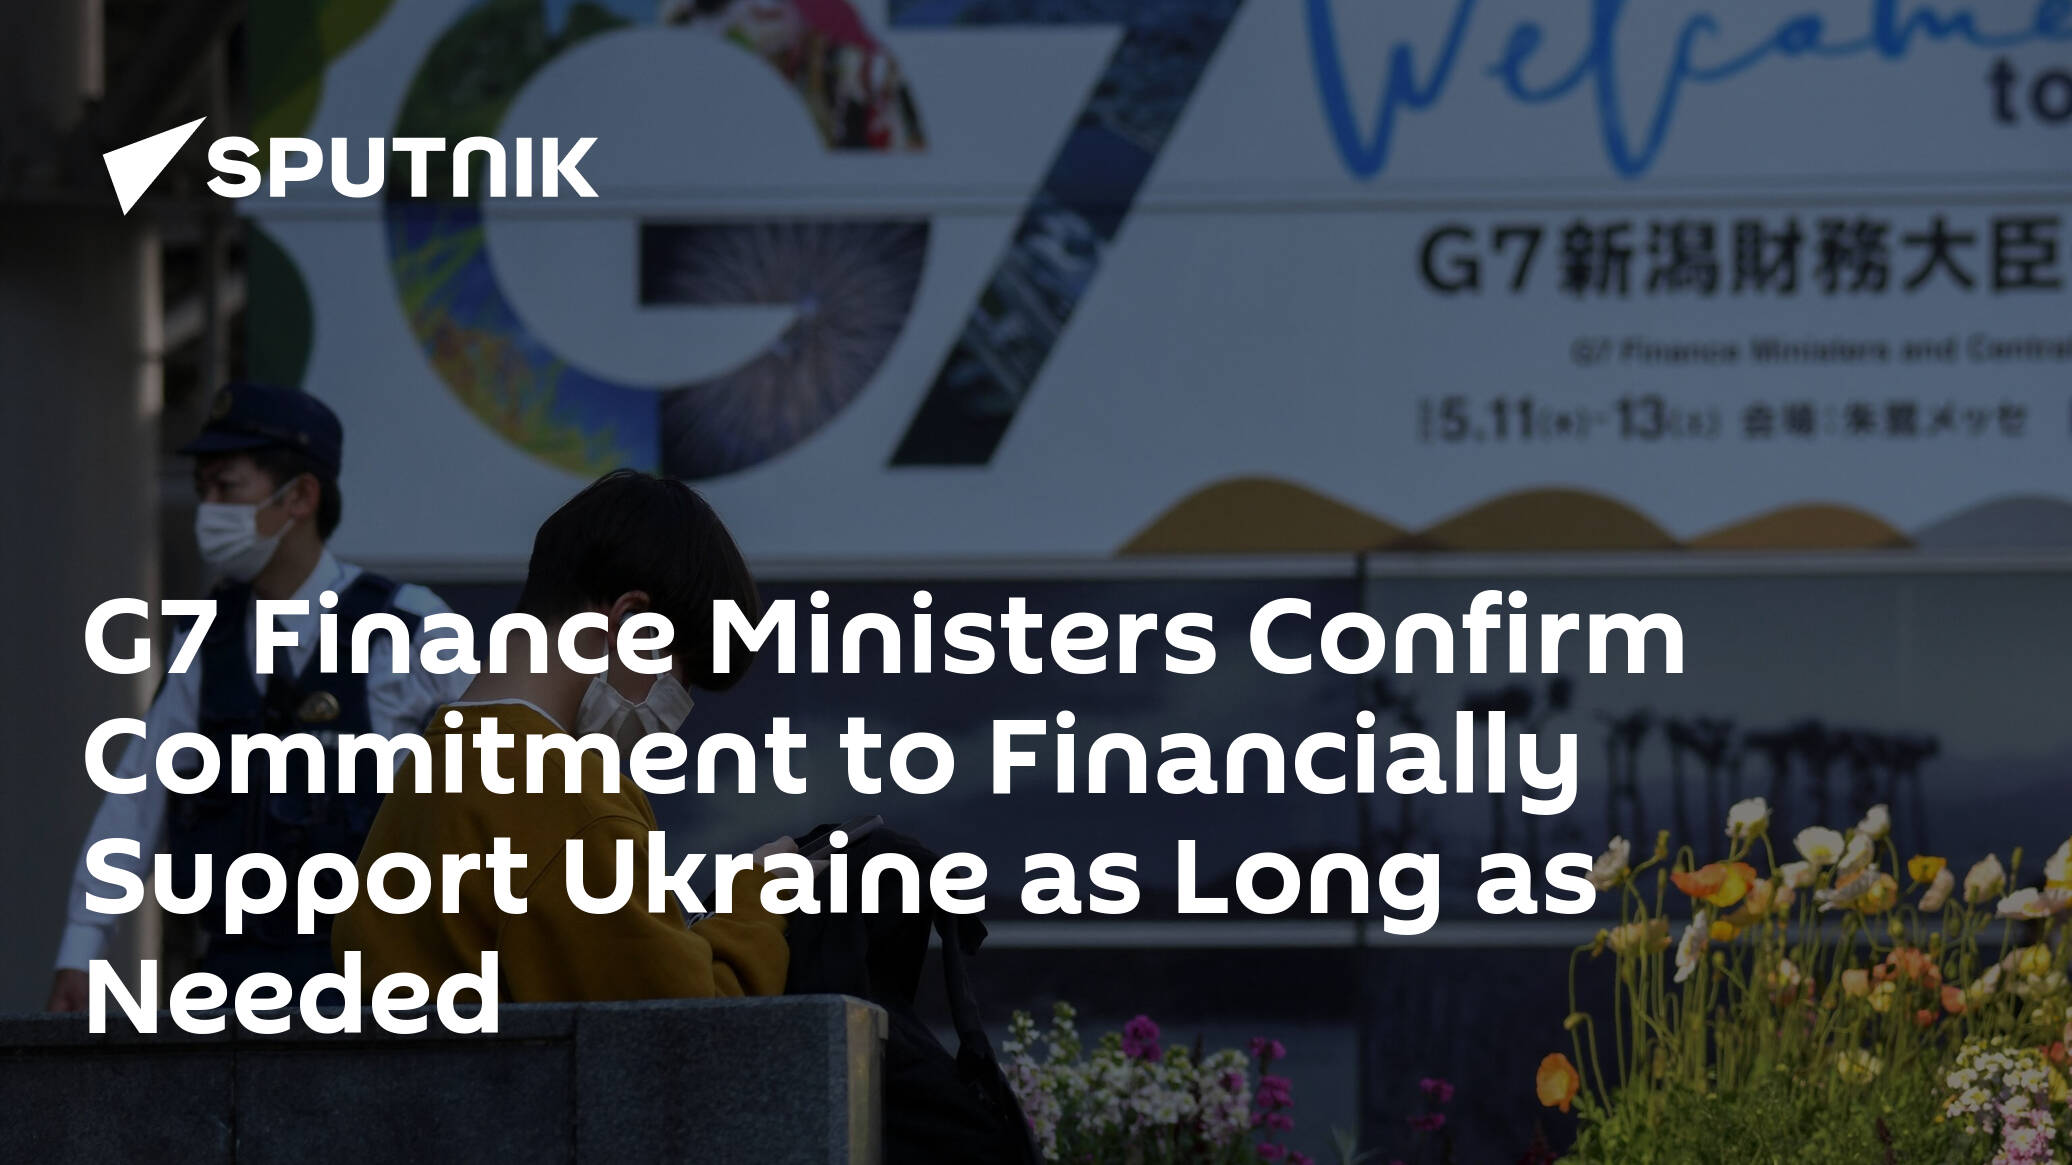 G7 Finance Ministers Confirm Commitment to Financially Support Ukraine as Long as Needed